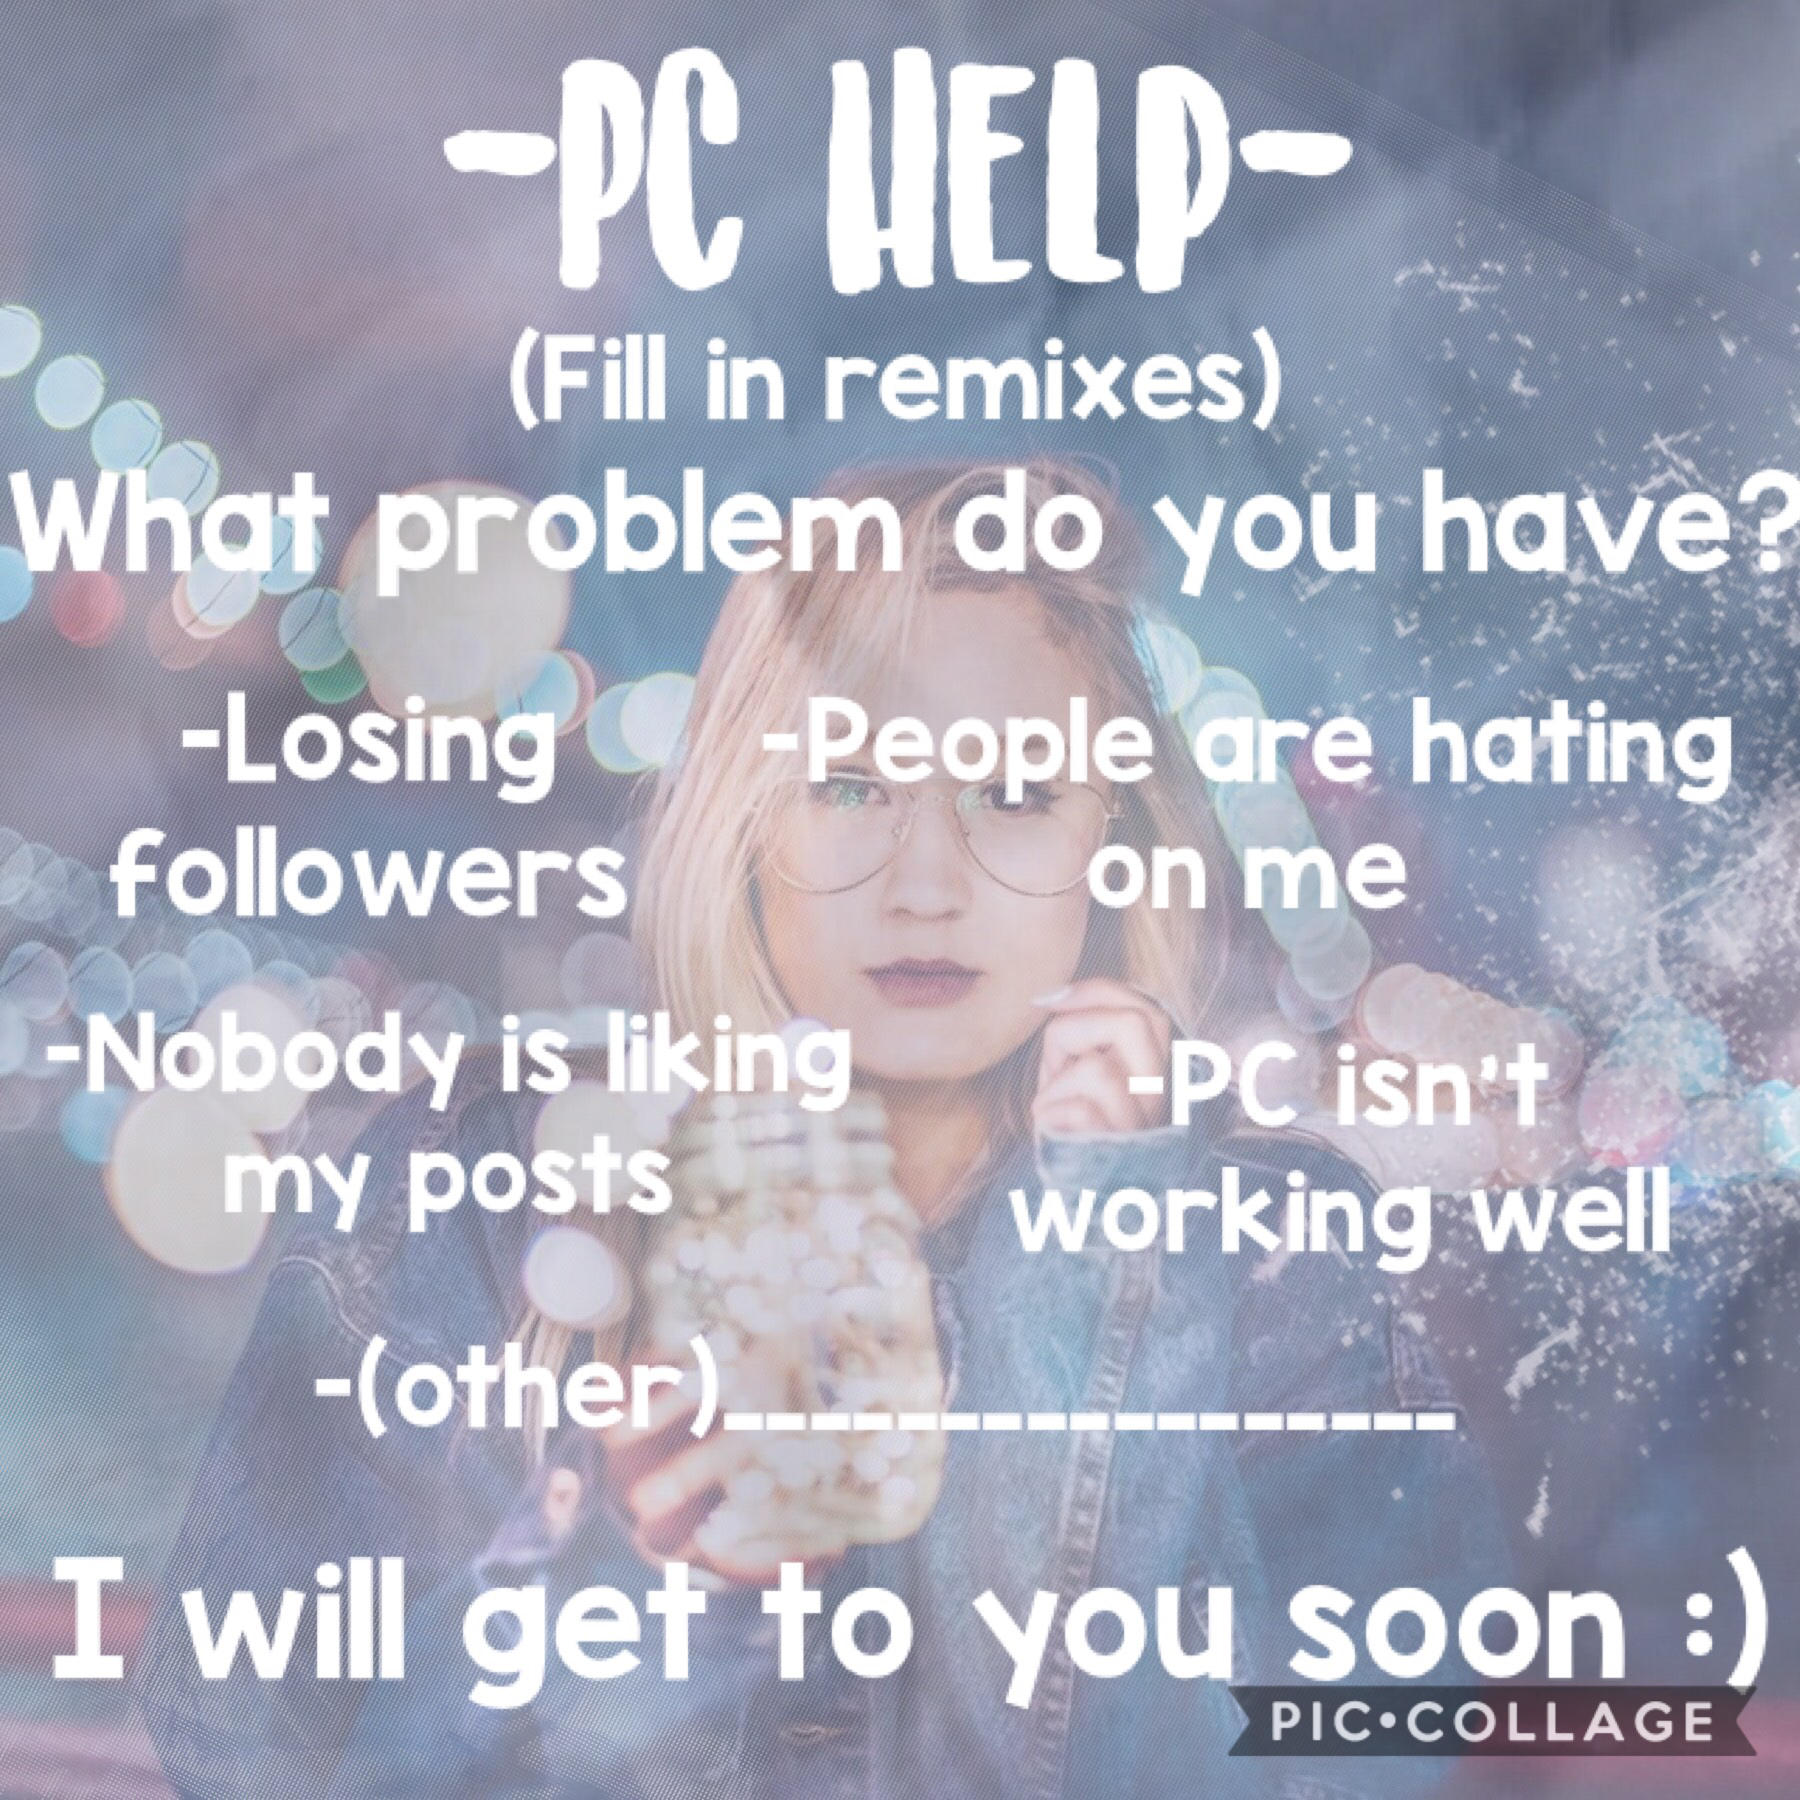 Tapyy
Please fill in the sheets if you have a difficult time on PC-I will remix solutions and discussions in your latest posts. 
Anddd-comment ✨ if you wish to have a fanpage 
Thanks so much for all the support!